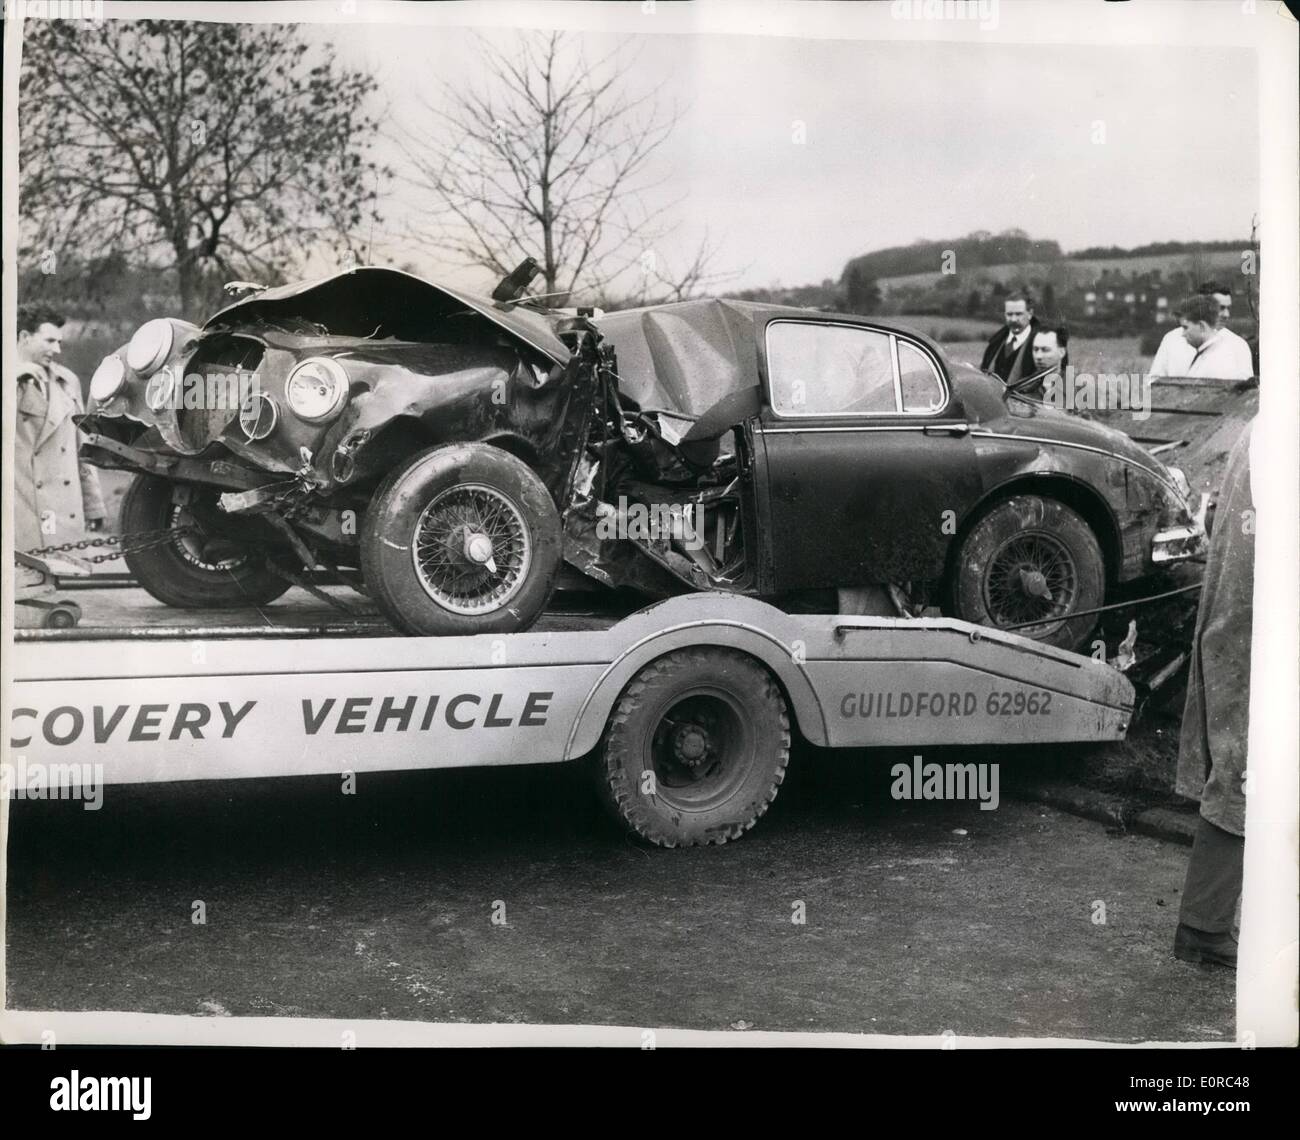 Mike Hawthorn's car after his fatal accident.